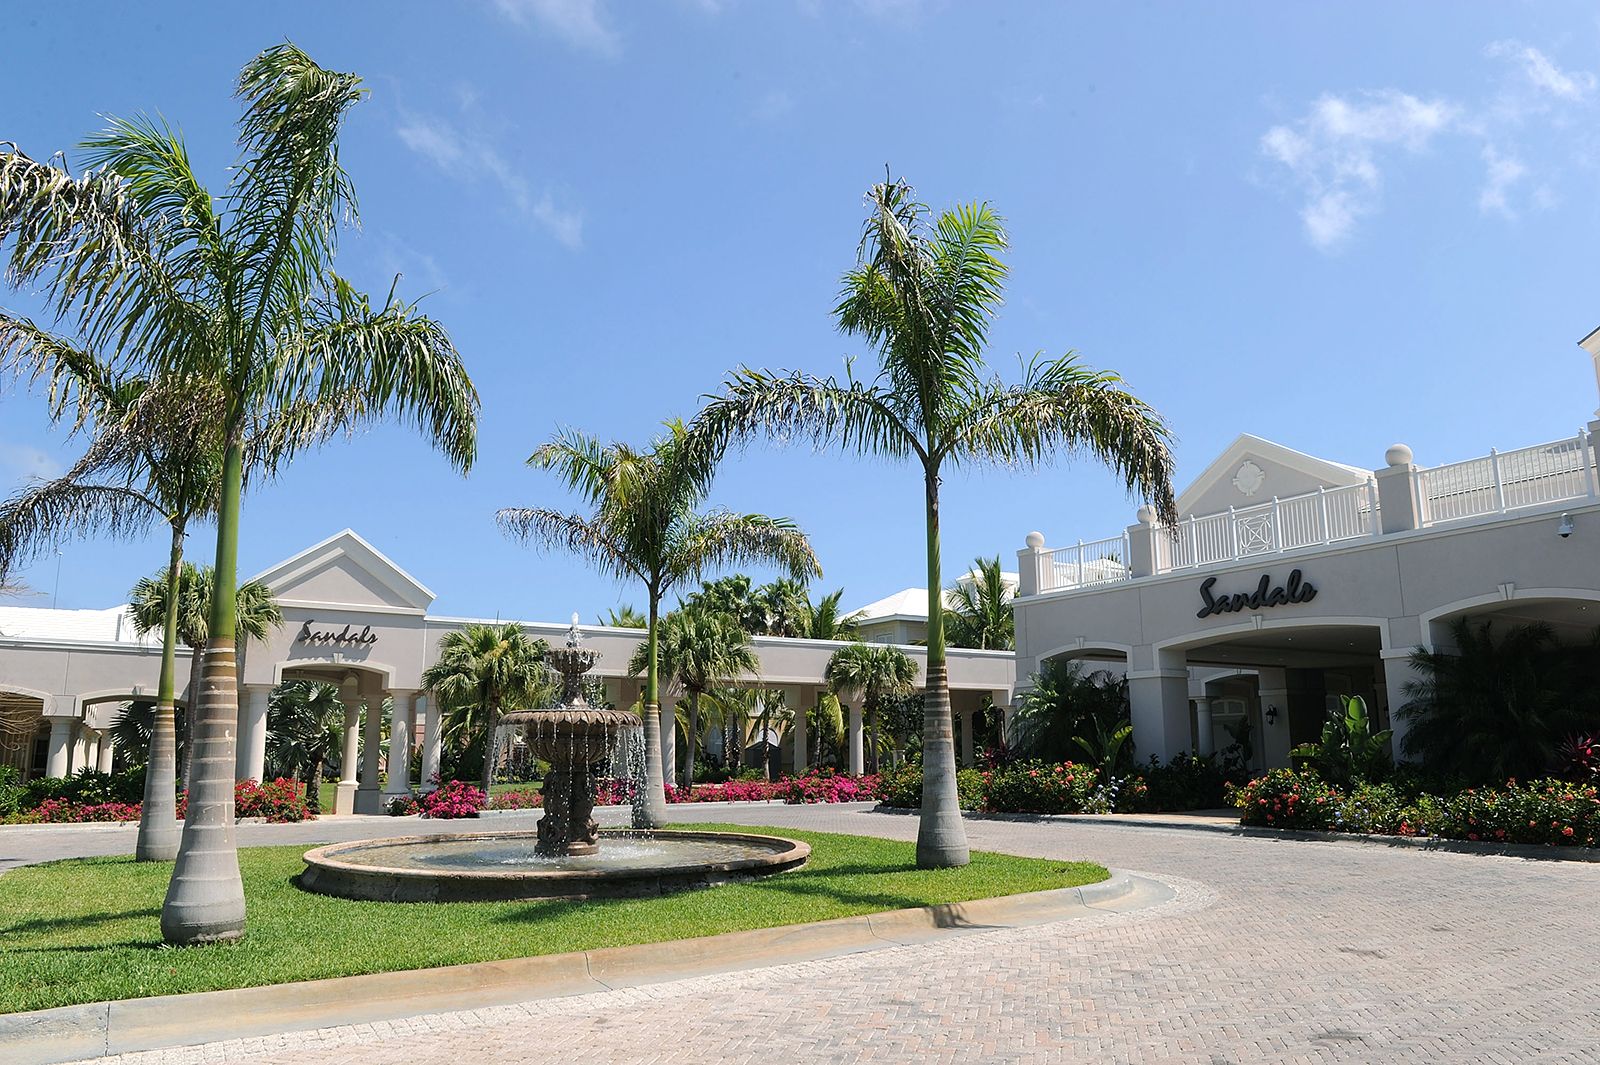 Royal Bahamas Police Force IDs All Three Americans Who Died At Sandals Emerald Bay Resort